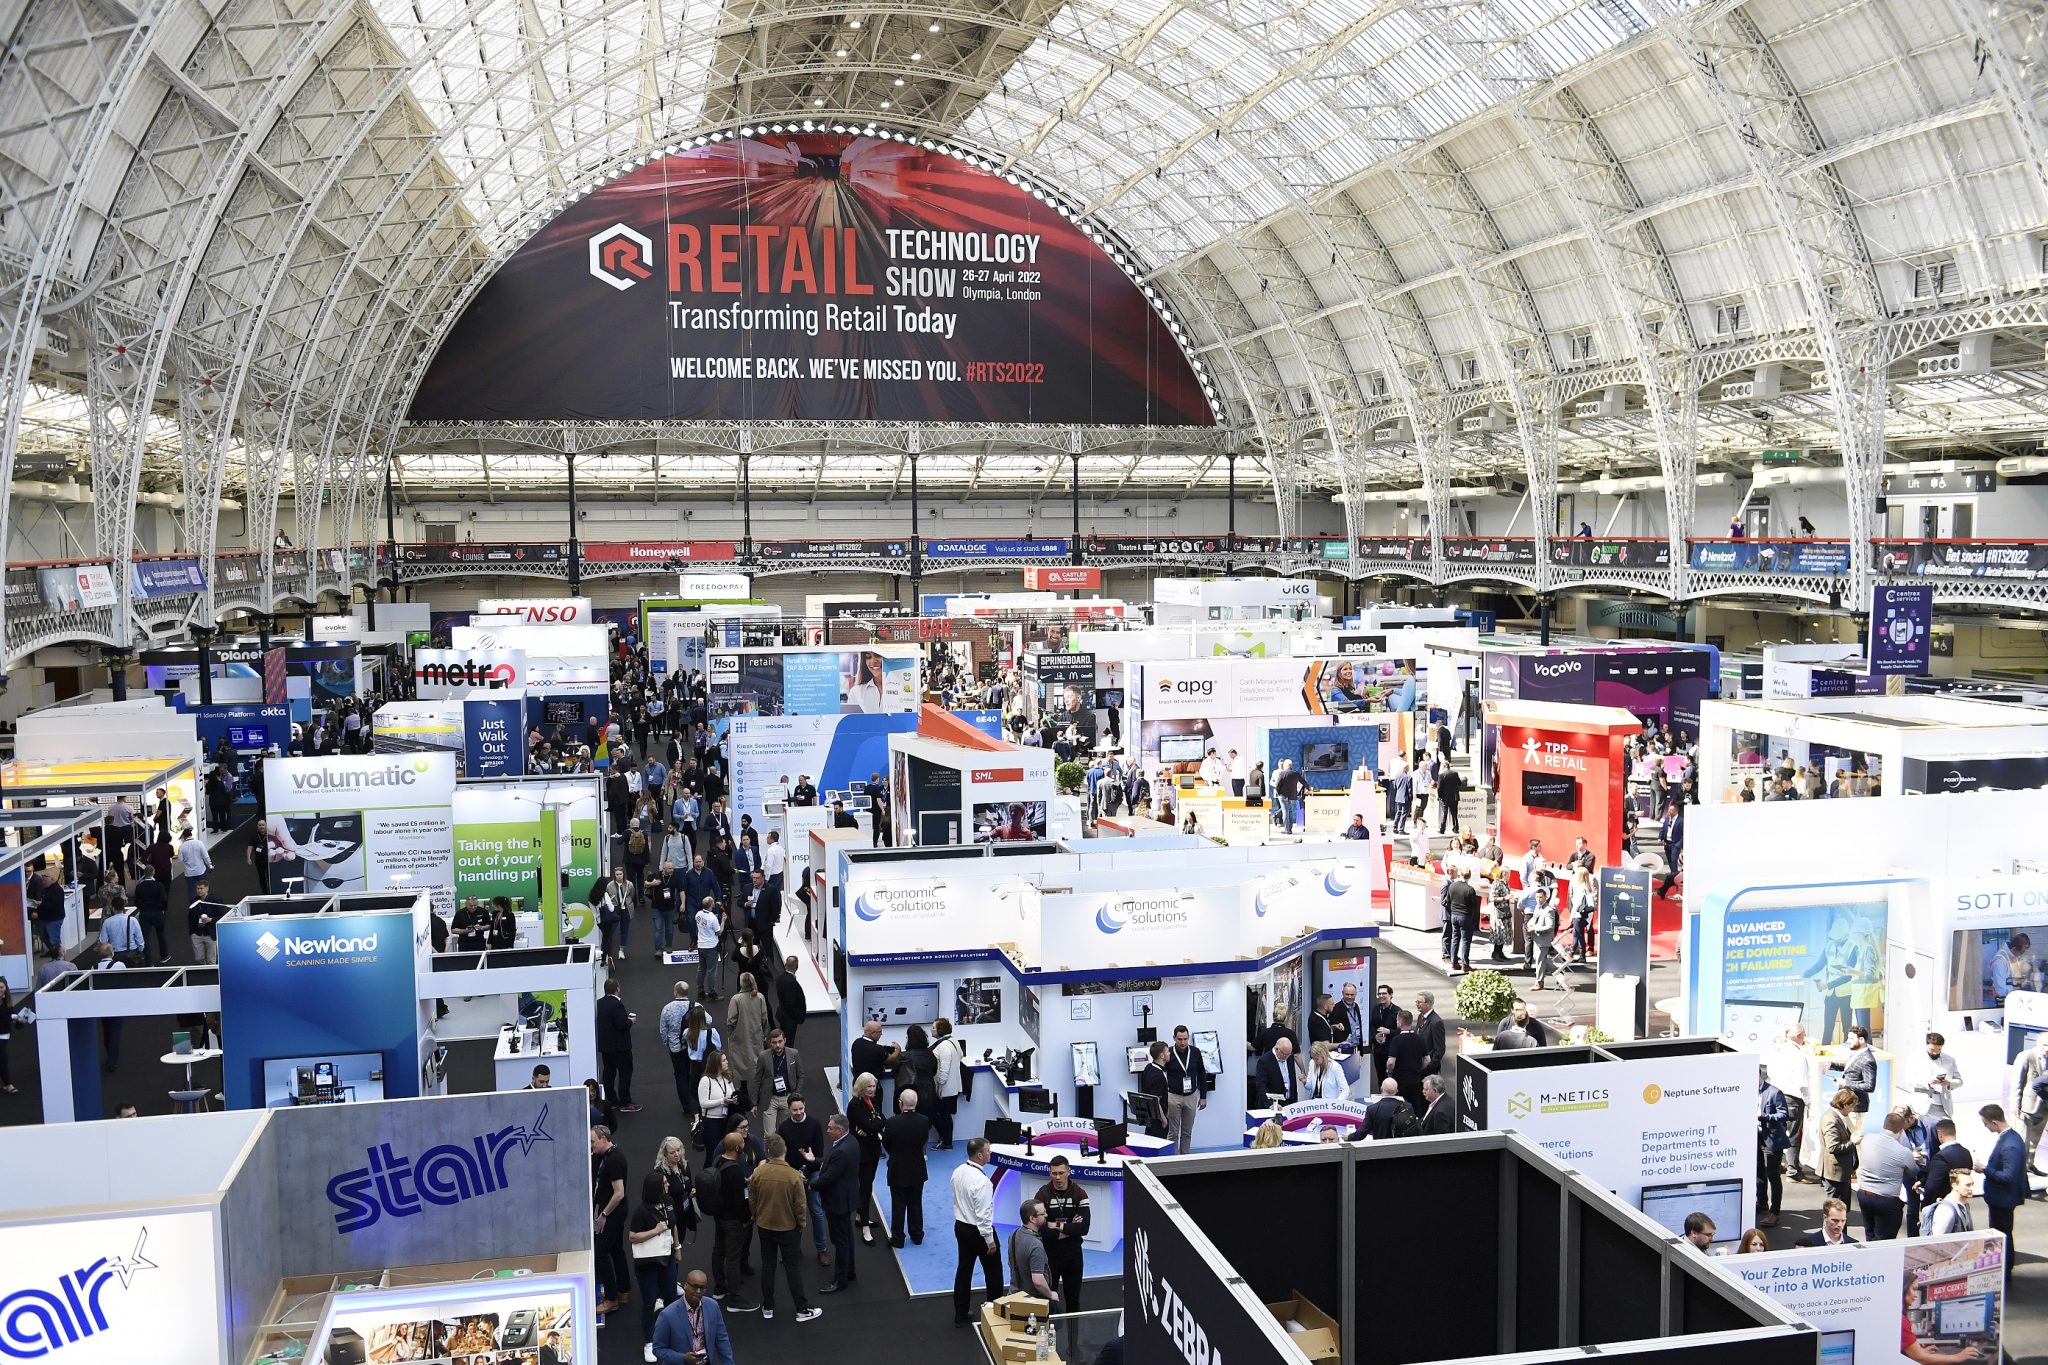 BRC sustainability boss Andrew Opie is on the Retail Technology Show line-up